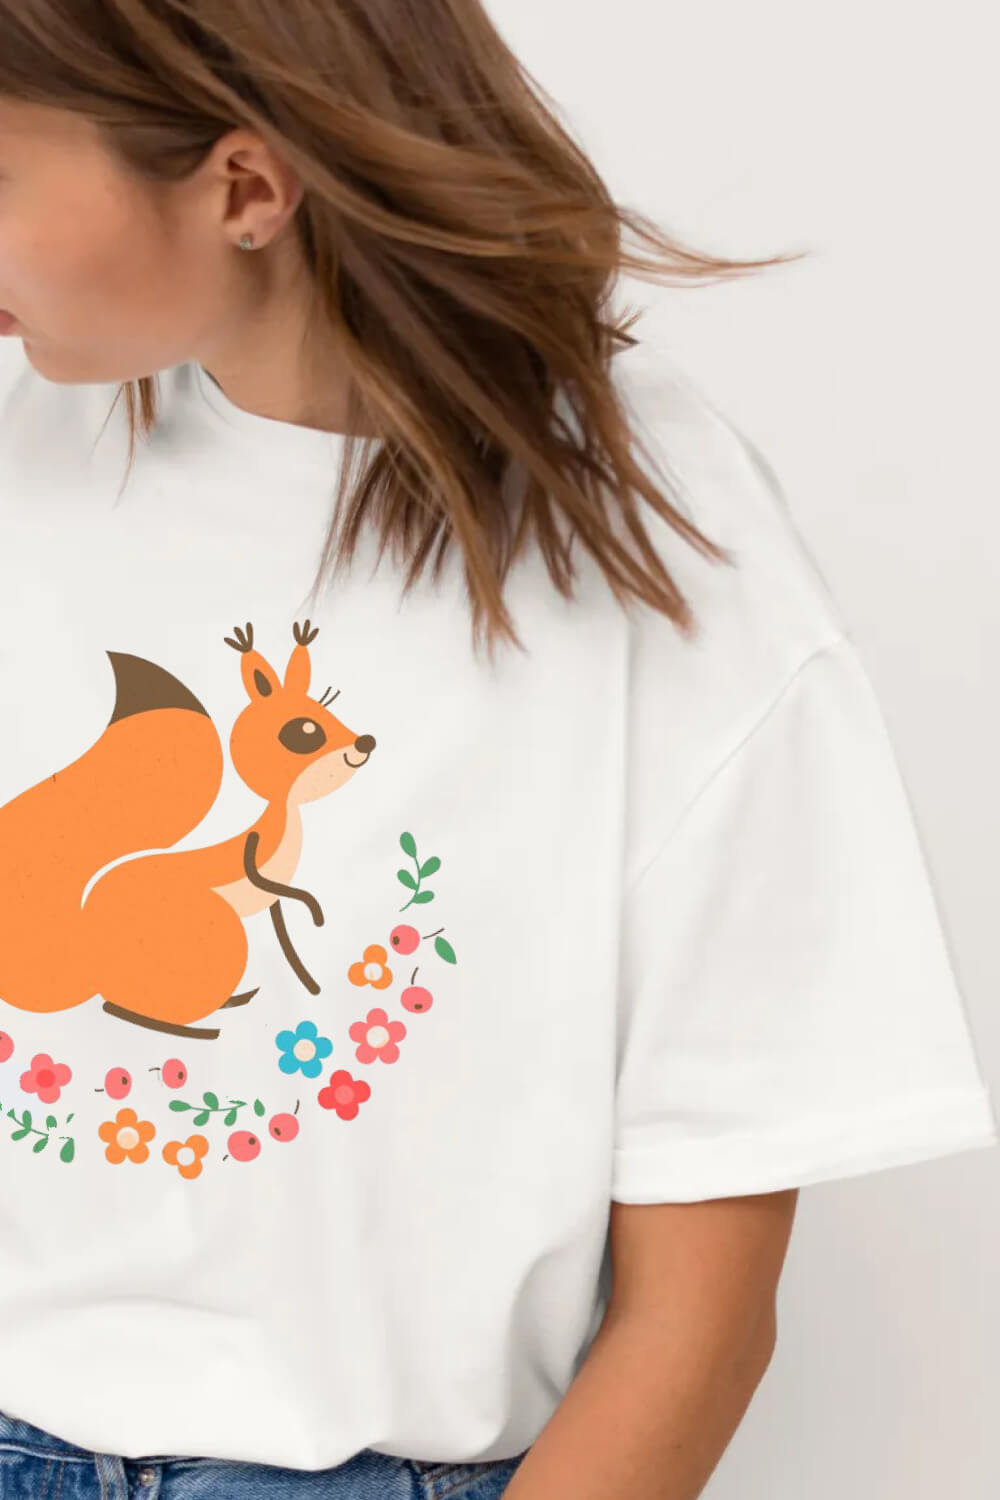 A funny squirrel with a fluffy tail surrounded by flowers and leaves painted on a girl's white t-shirt.